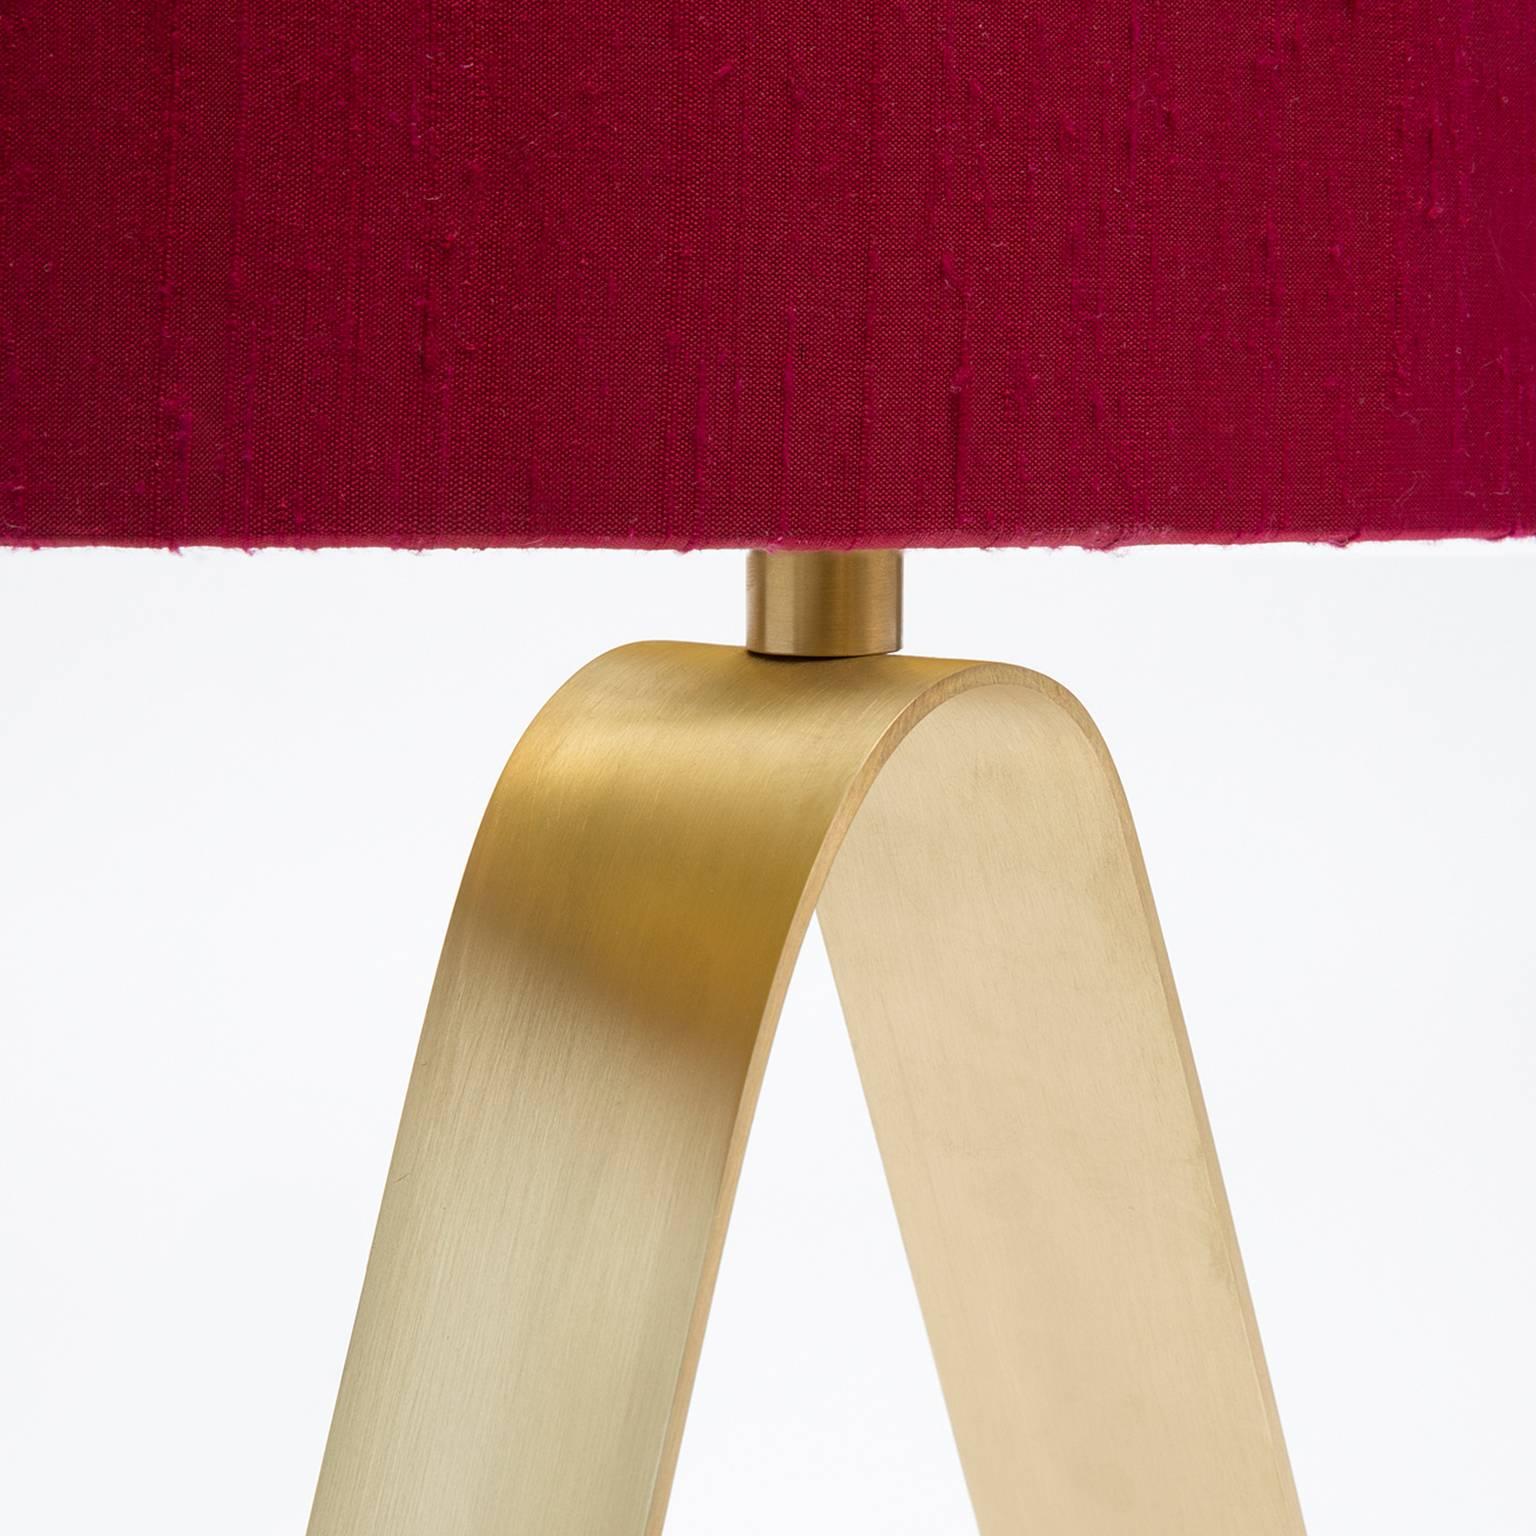 Triangula brass table lamp with red linen lampshade by trans-LUXE

OAH 22″ H

Base: 12″ H x 10″ W base

Linen lampshade: Oval 9" H x 15" W.

Ruby Red Linen Shade by trans-LUXE.

Made in New York City by trans-LUXE.

Additional custom